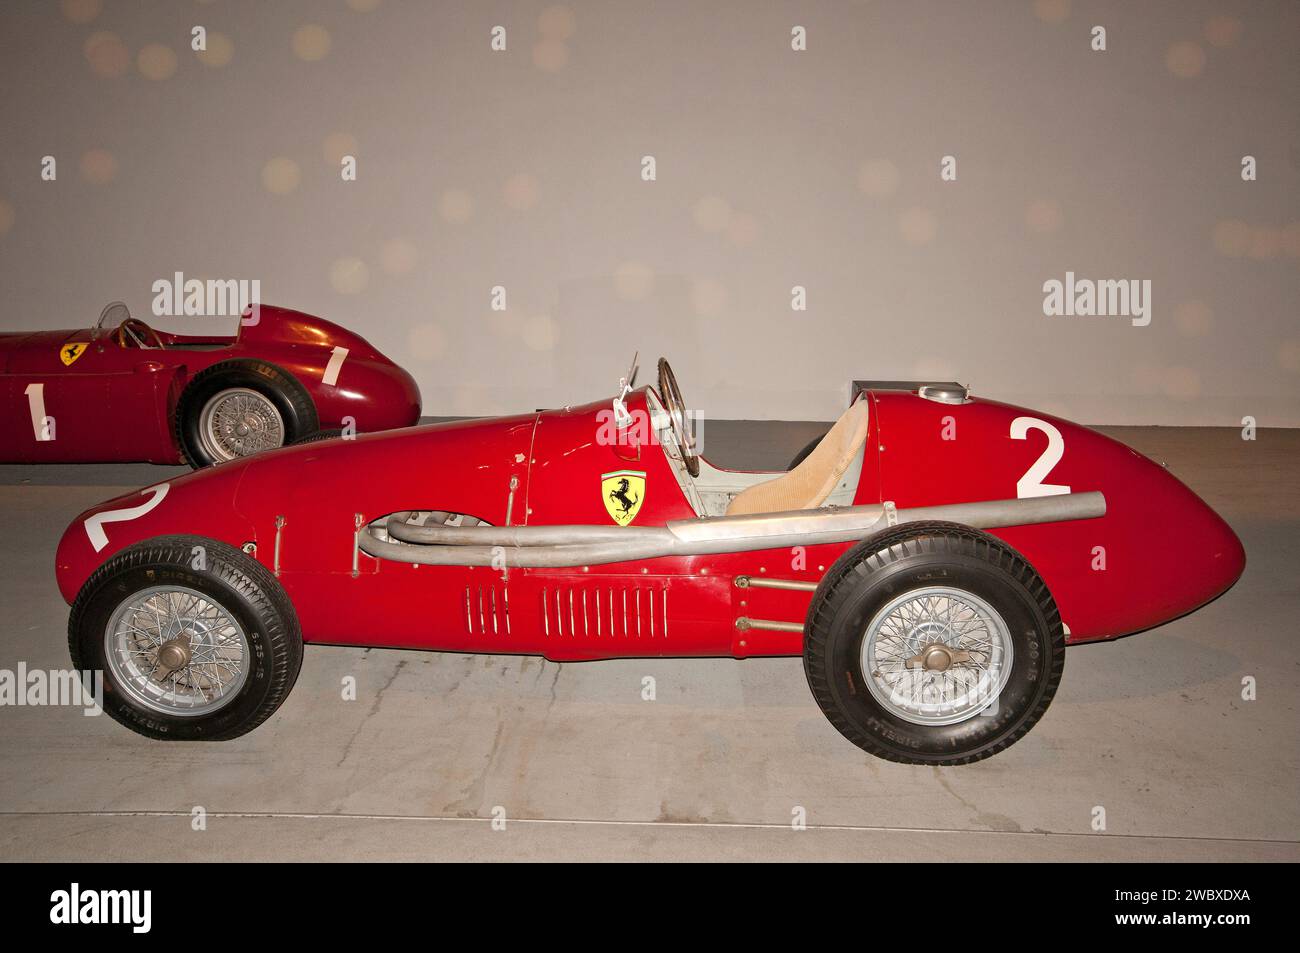 Racing car Ferrari 500 F2 (Italy 1952), Museo Nazionale dell'Automobile (MAUTO), National Car Museum (since 1933), Turin, Piedmont, Italy Stock Photo